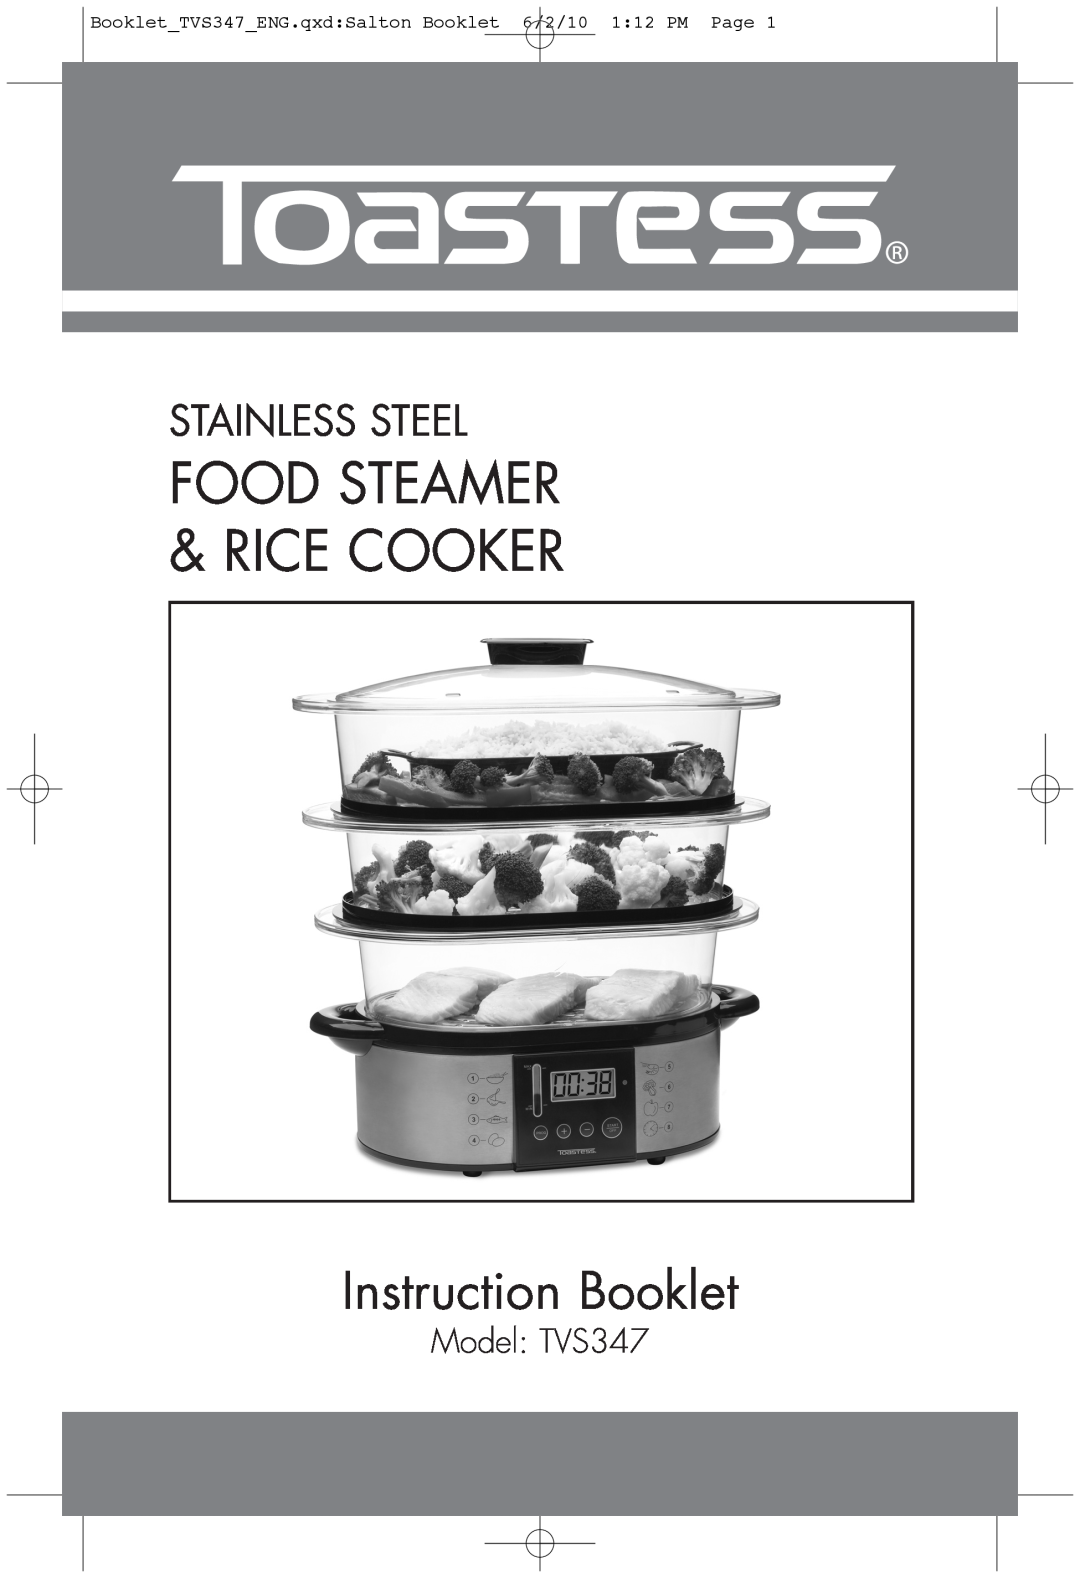 Toastess manual Model TVS347, FOOD STEAMER & RICE COOKER Instruction Booklet, Stainless Steel 